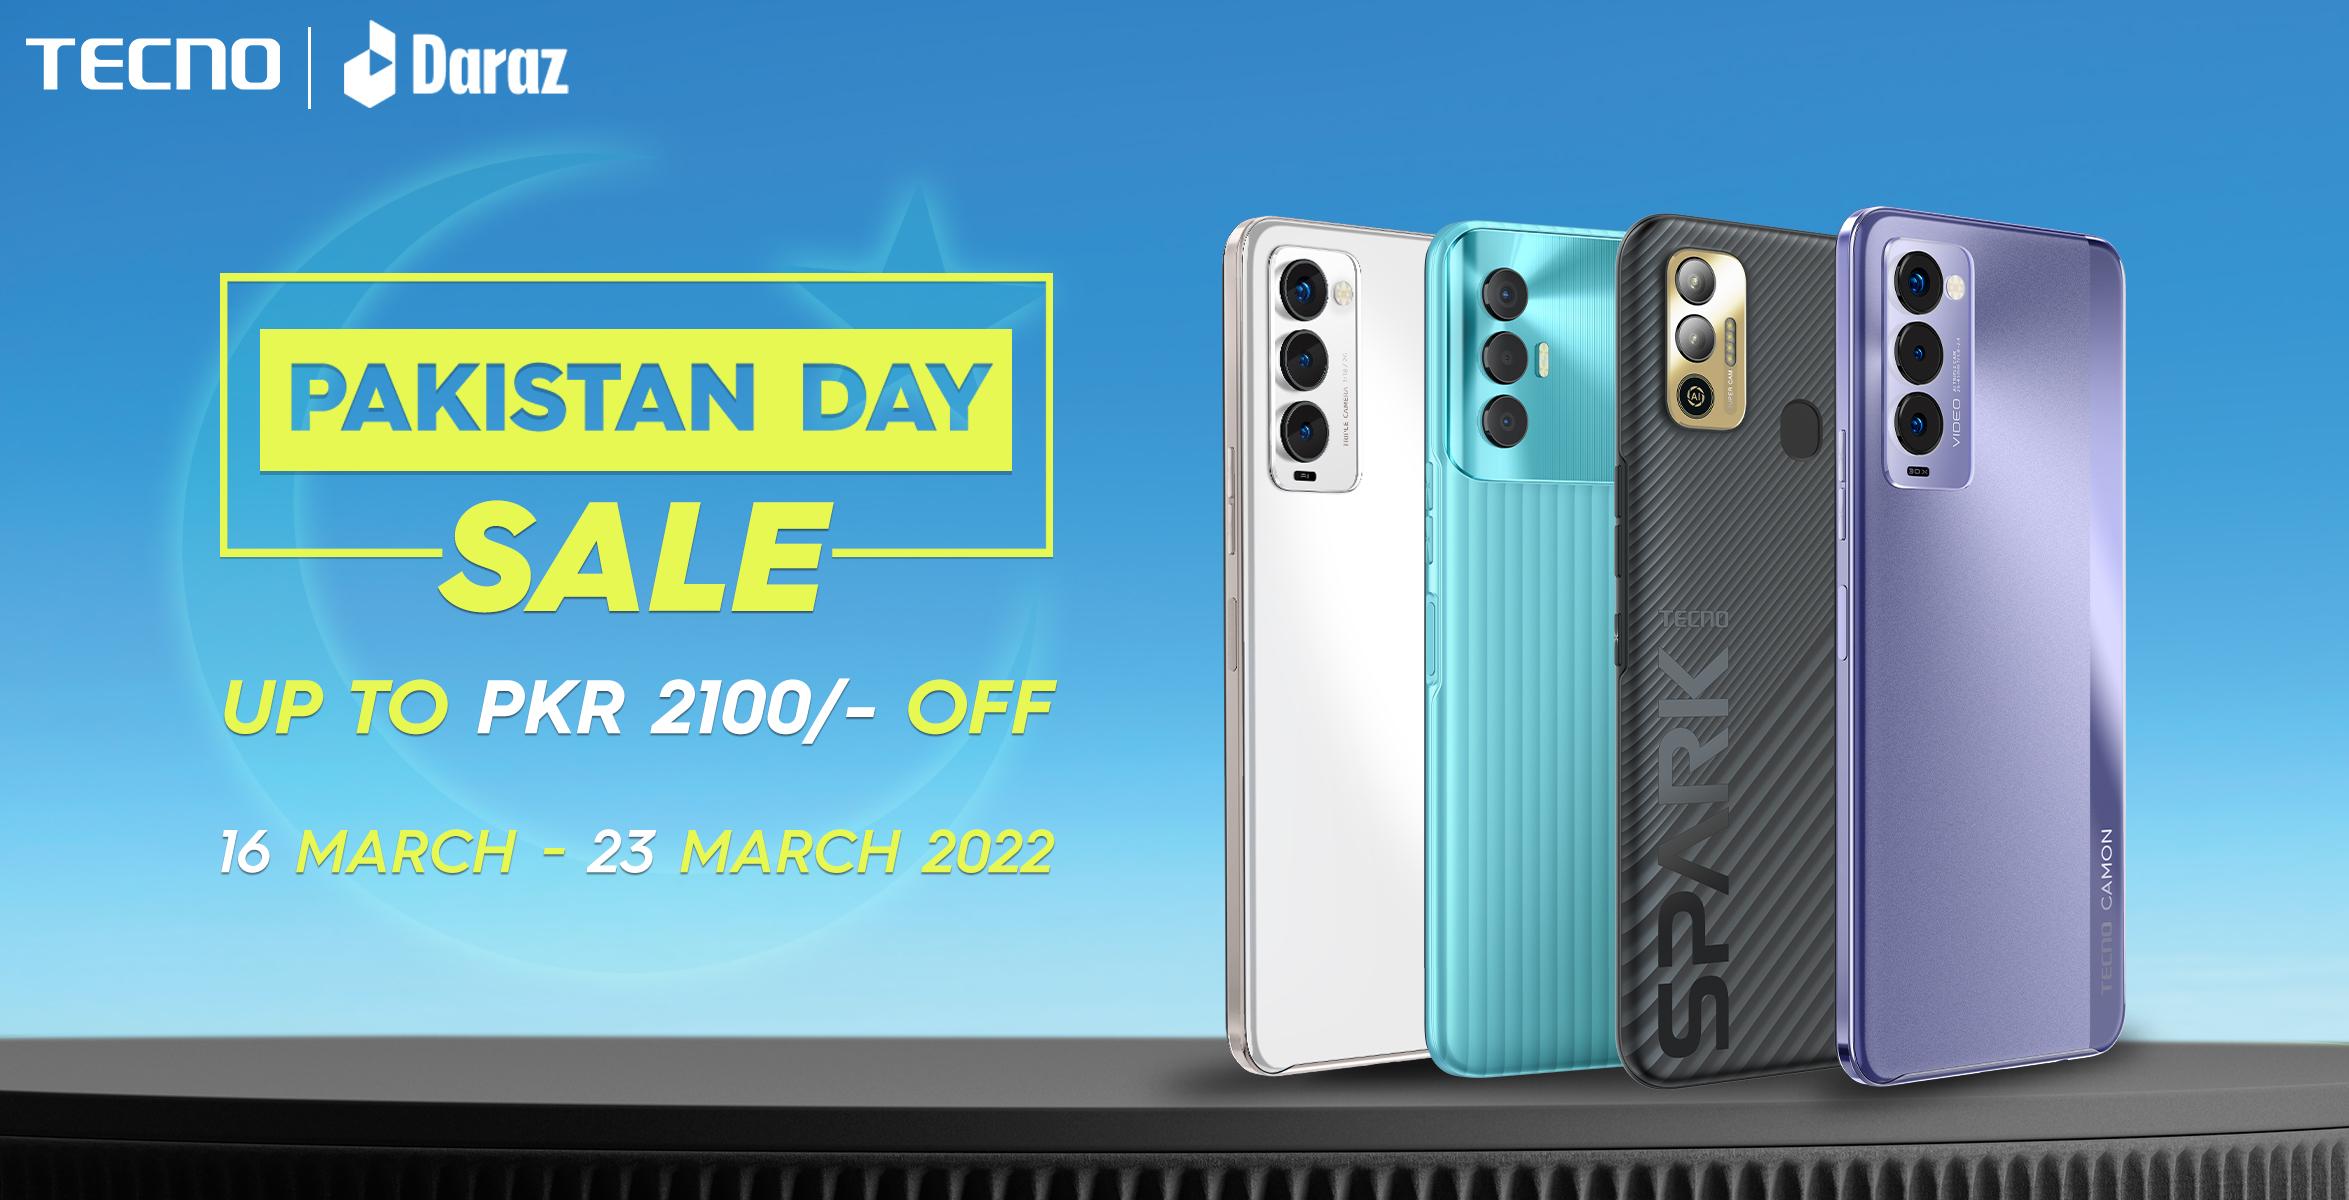 Daraz Sale; TECNO brings up to 40% discounts for users